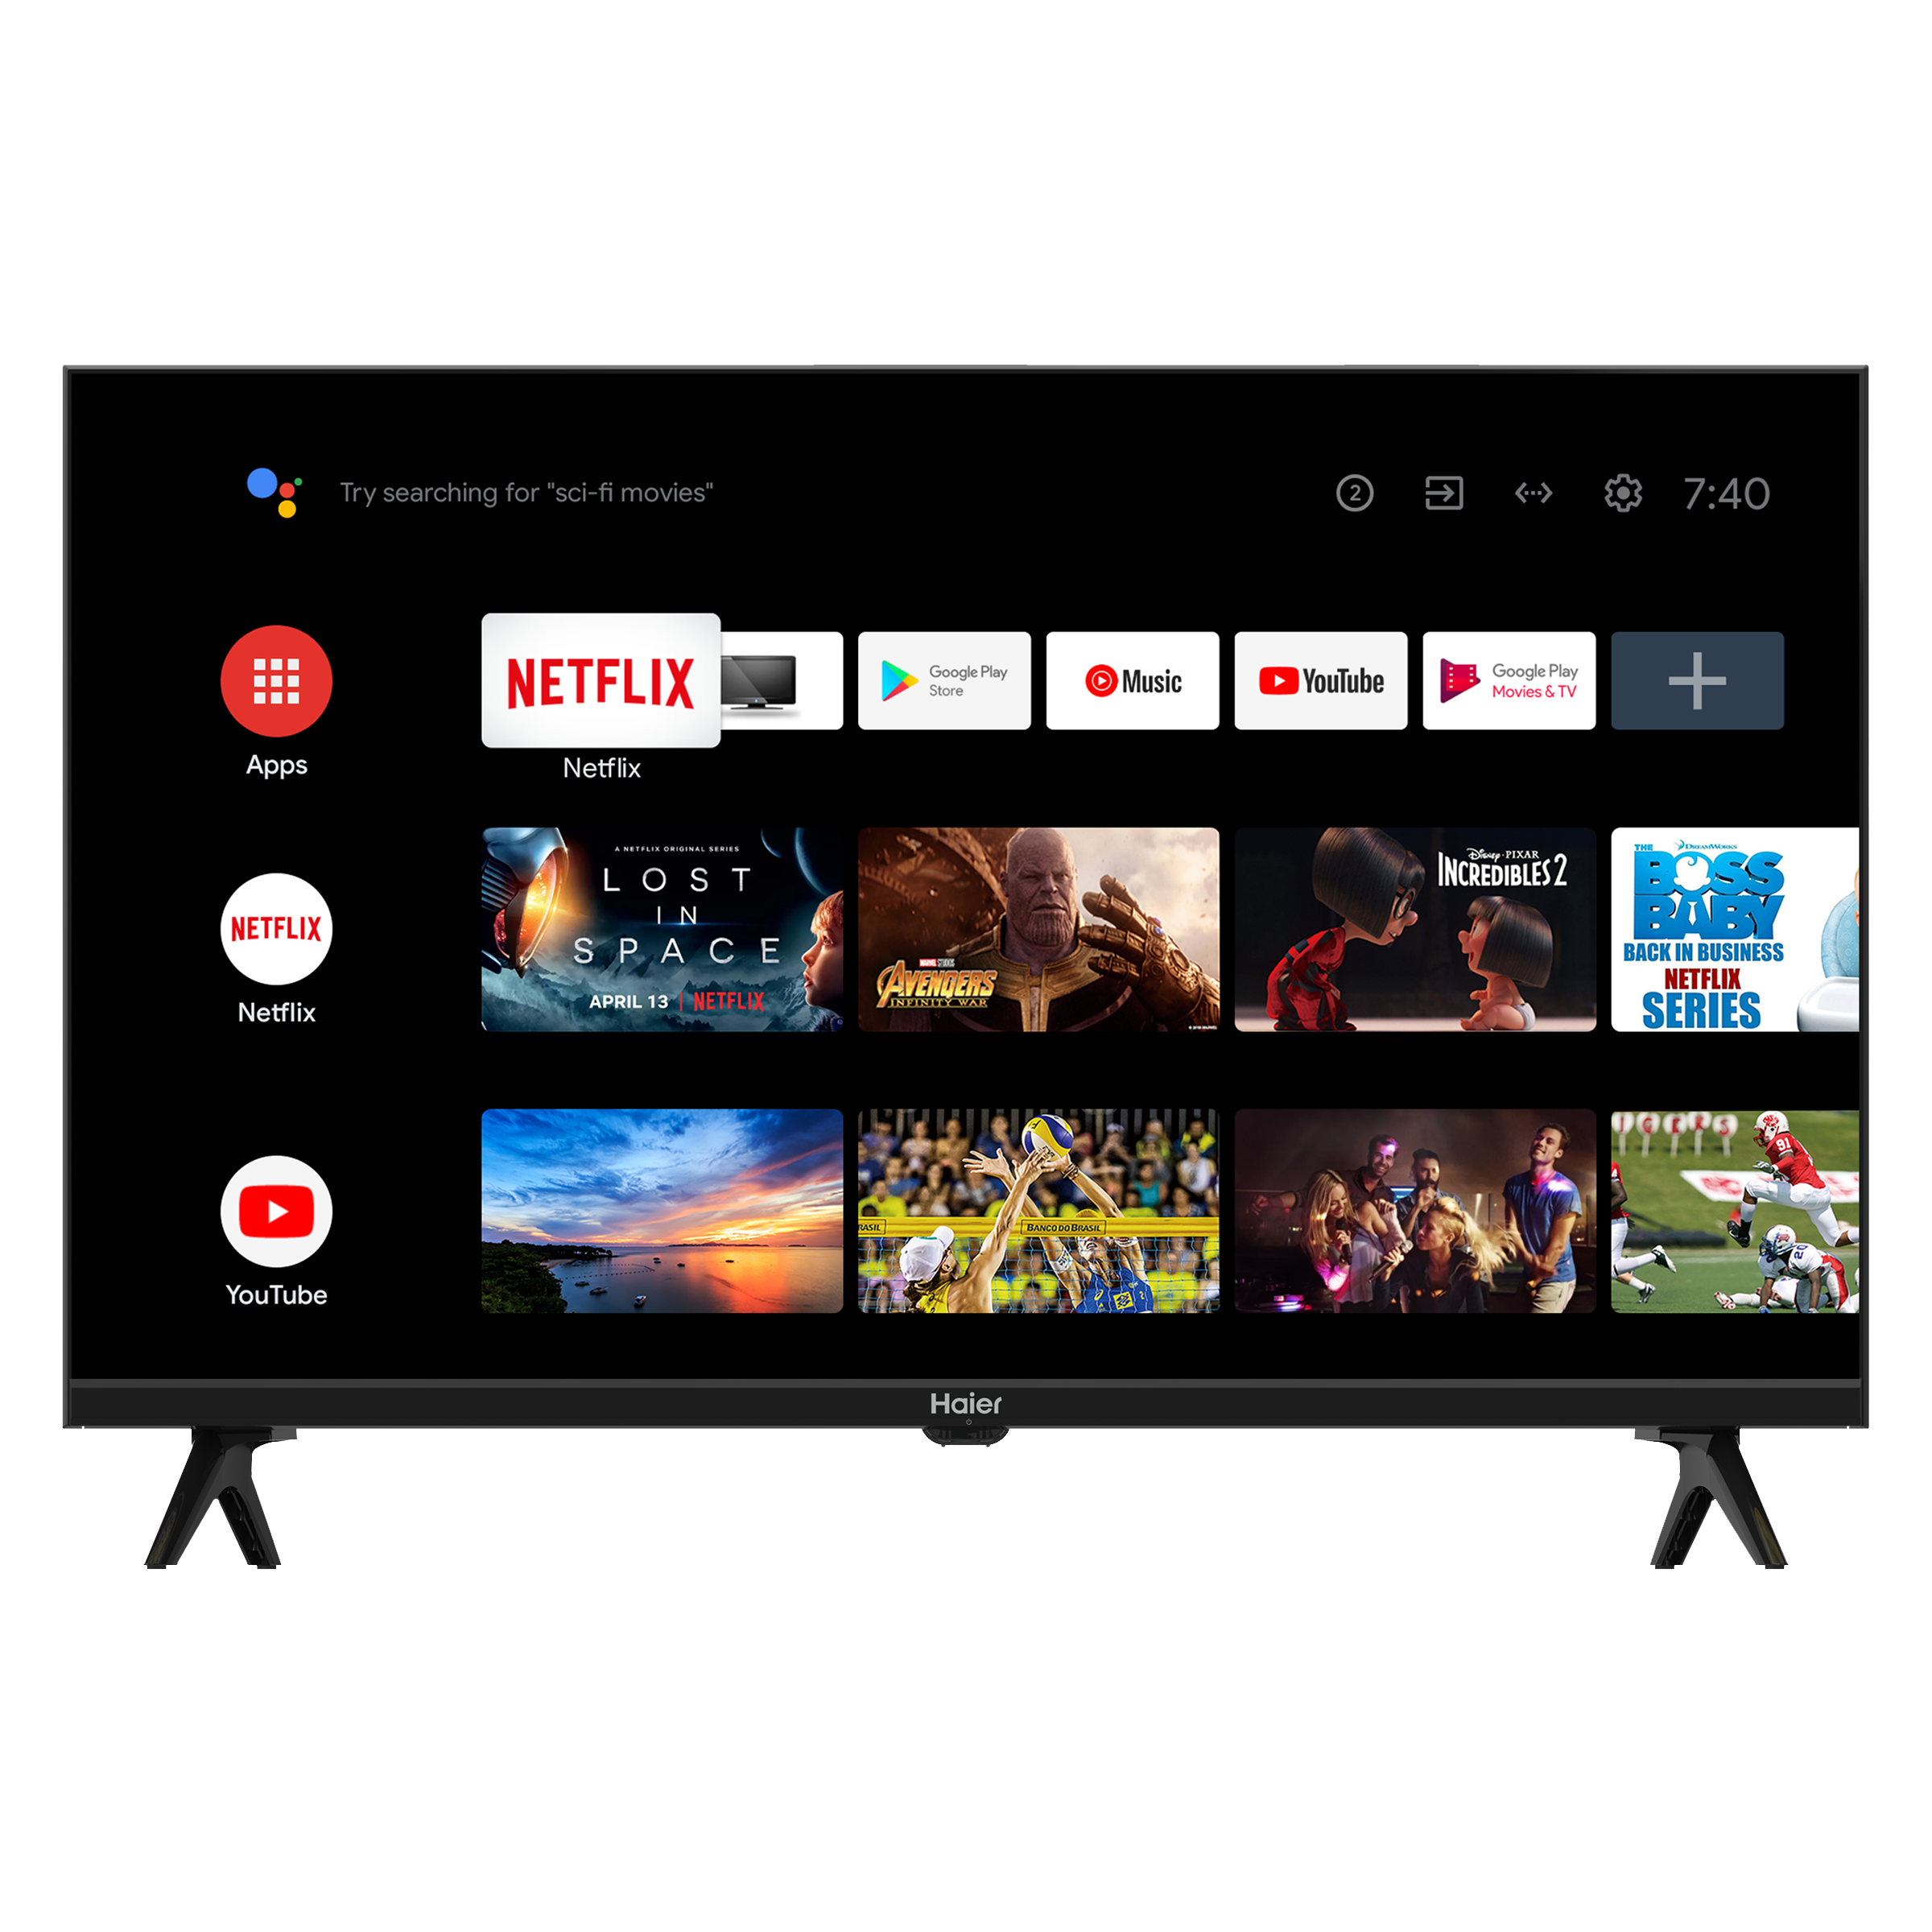 Haier 80 cm (32 inch) HD Ready LED Smart Android TV with Google Assistant_1